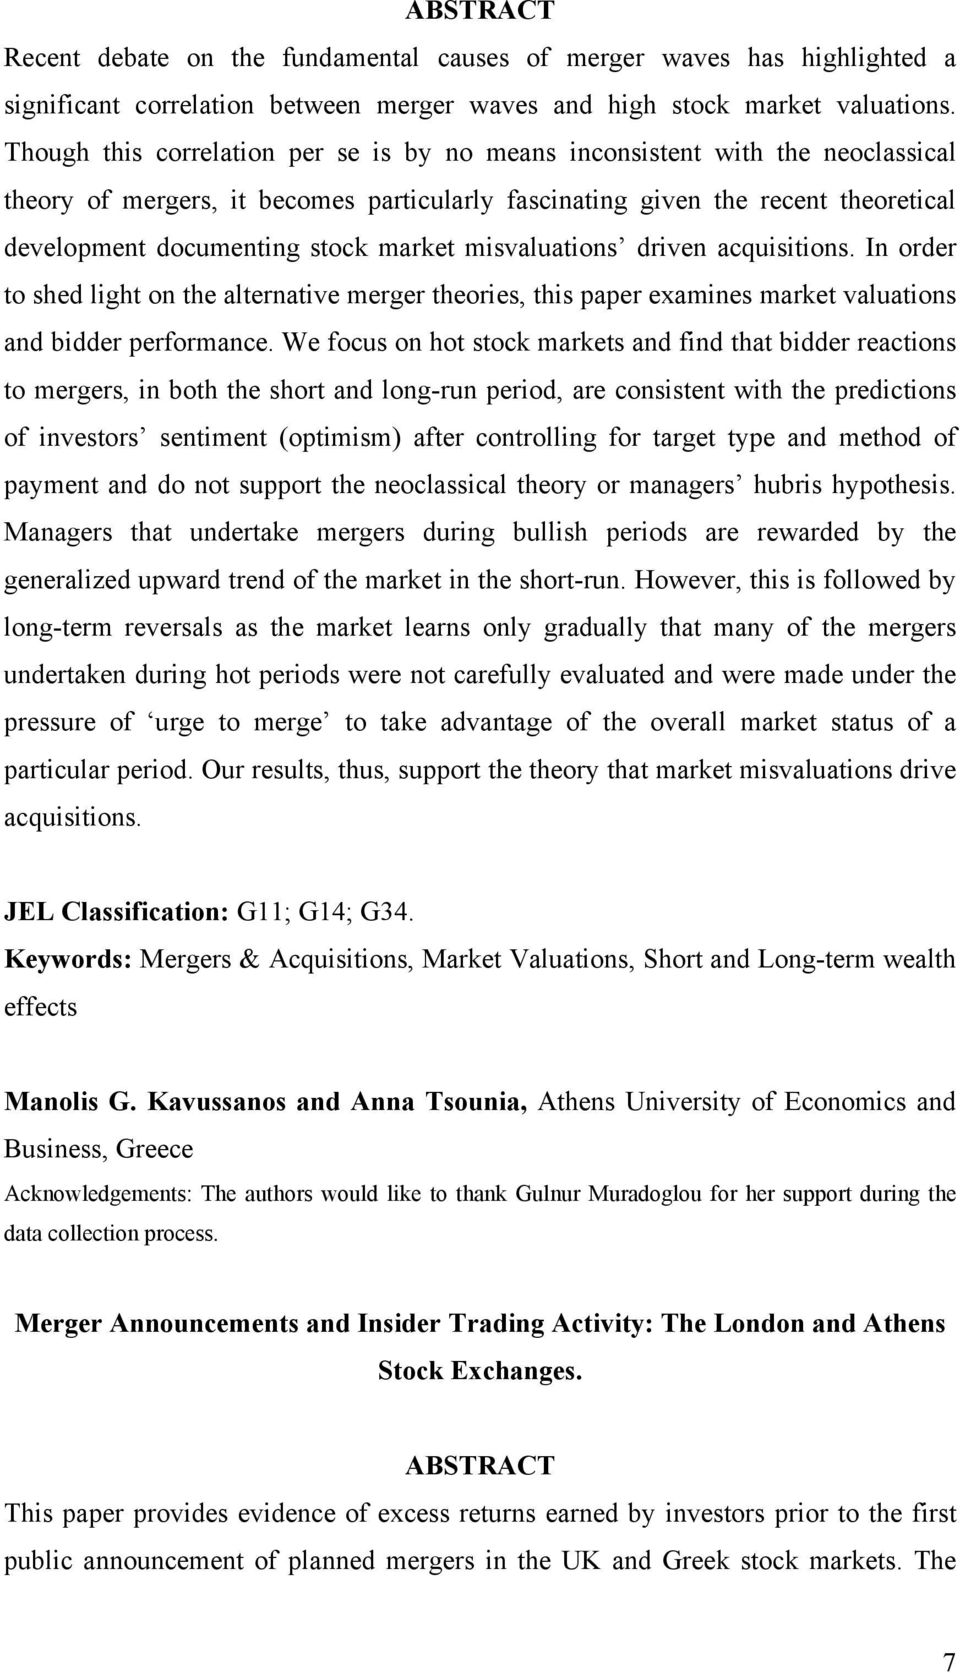 market misvaluations driven acquisitions. In order to shed light on the alternative merger theories, this paper examines market valuations and bidder performance.